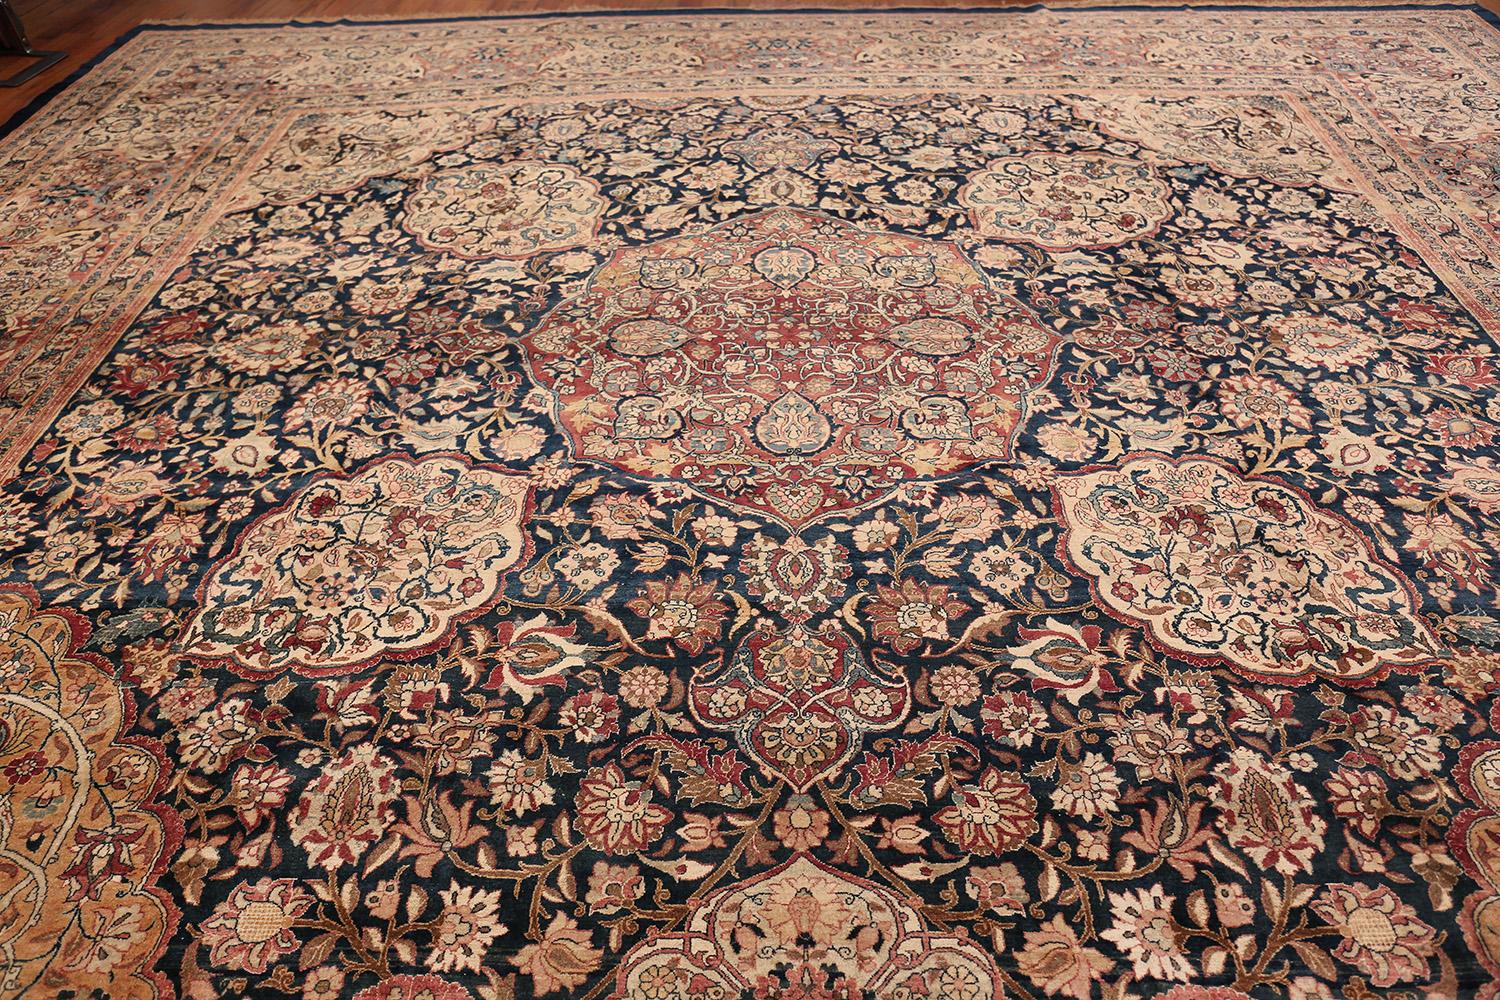 20th Century Oversized Antique Tehran Persian Carpet. Size: 14 ft 3 in x 22 ft 3 in